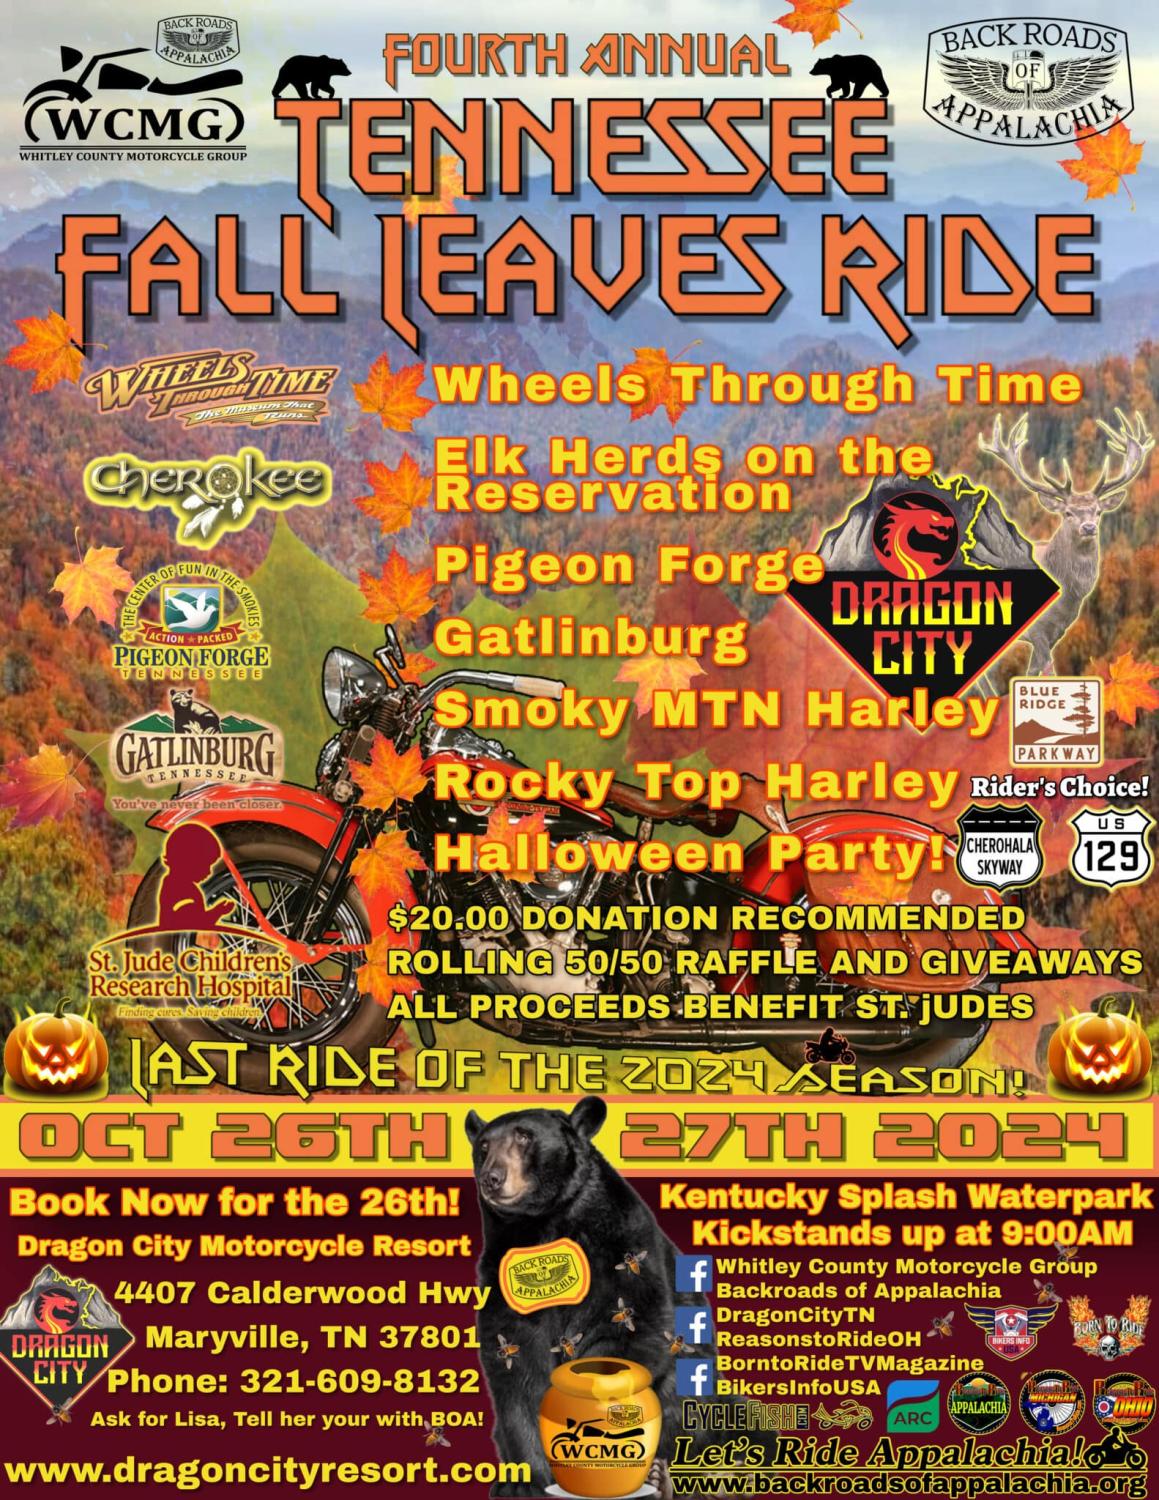 WCMG/BOA Annual Fall Leaves Ride for St. Jude